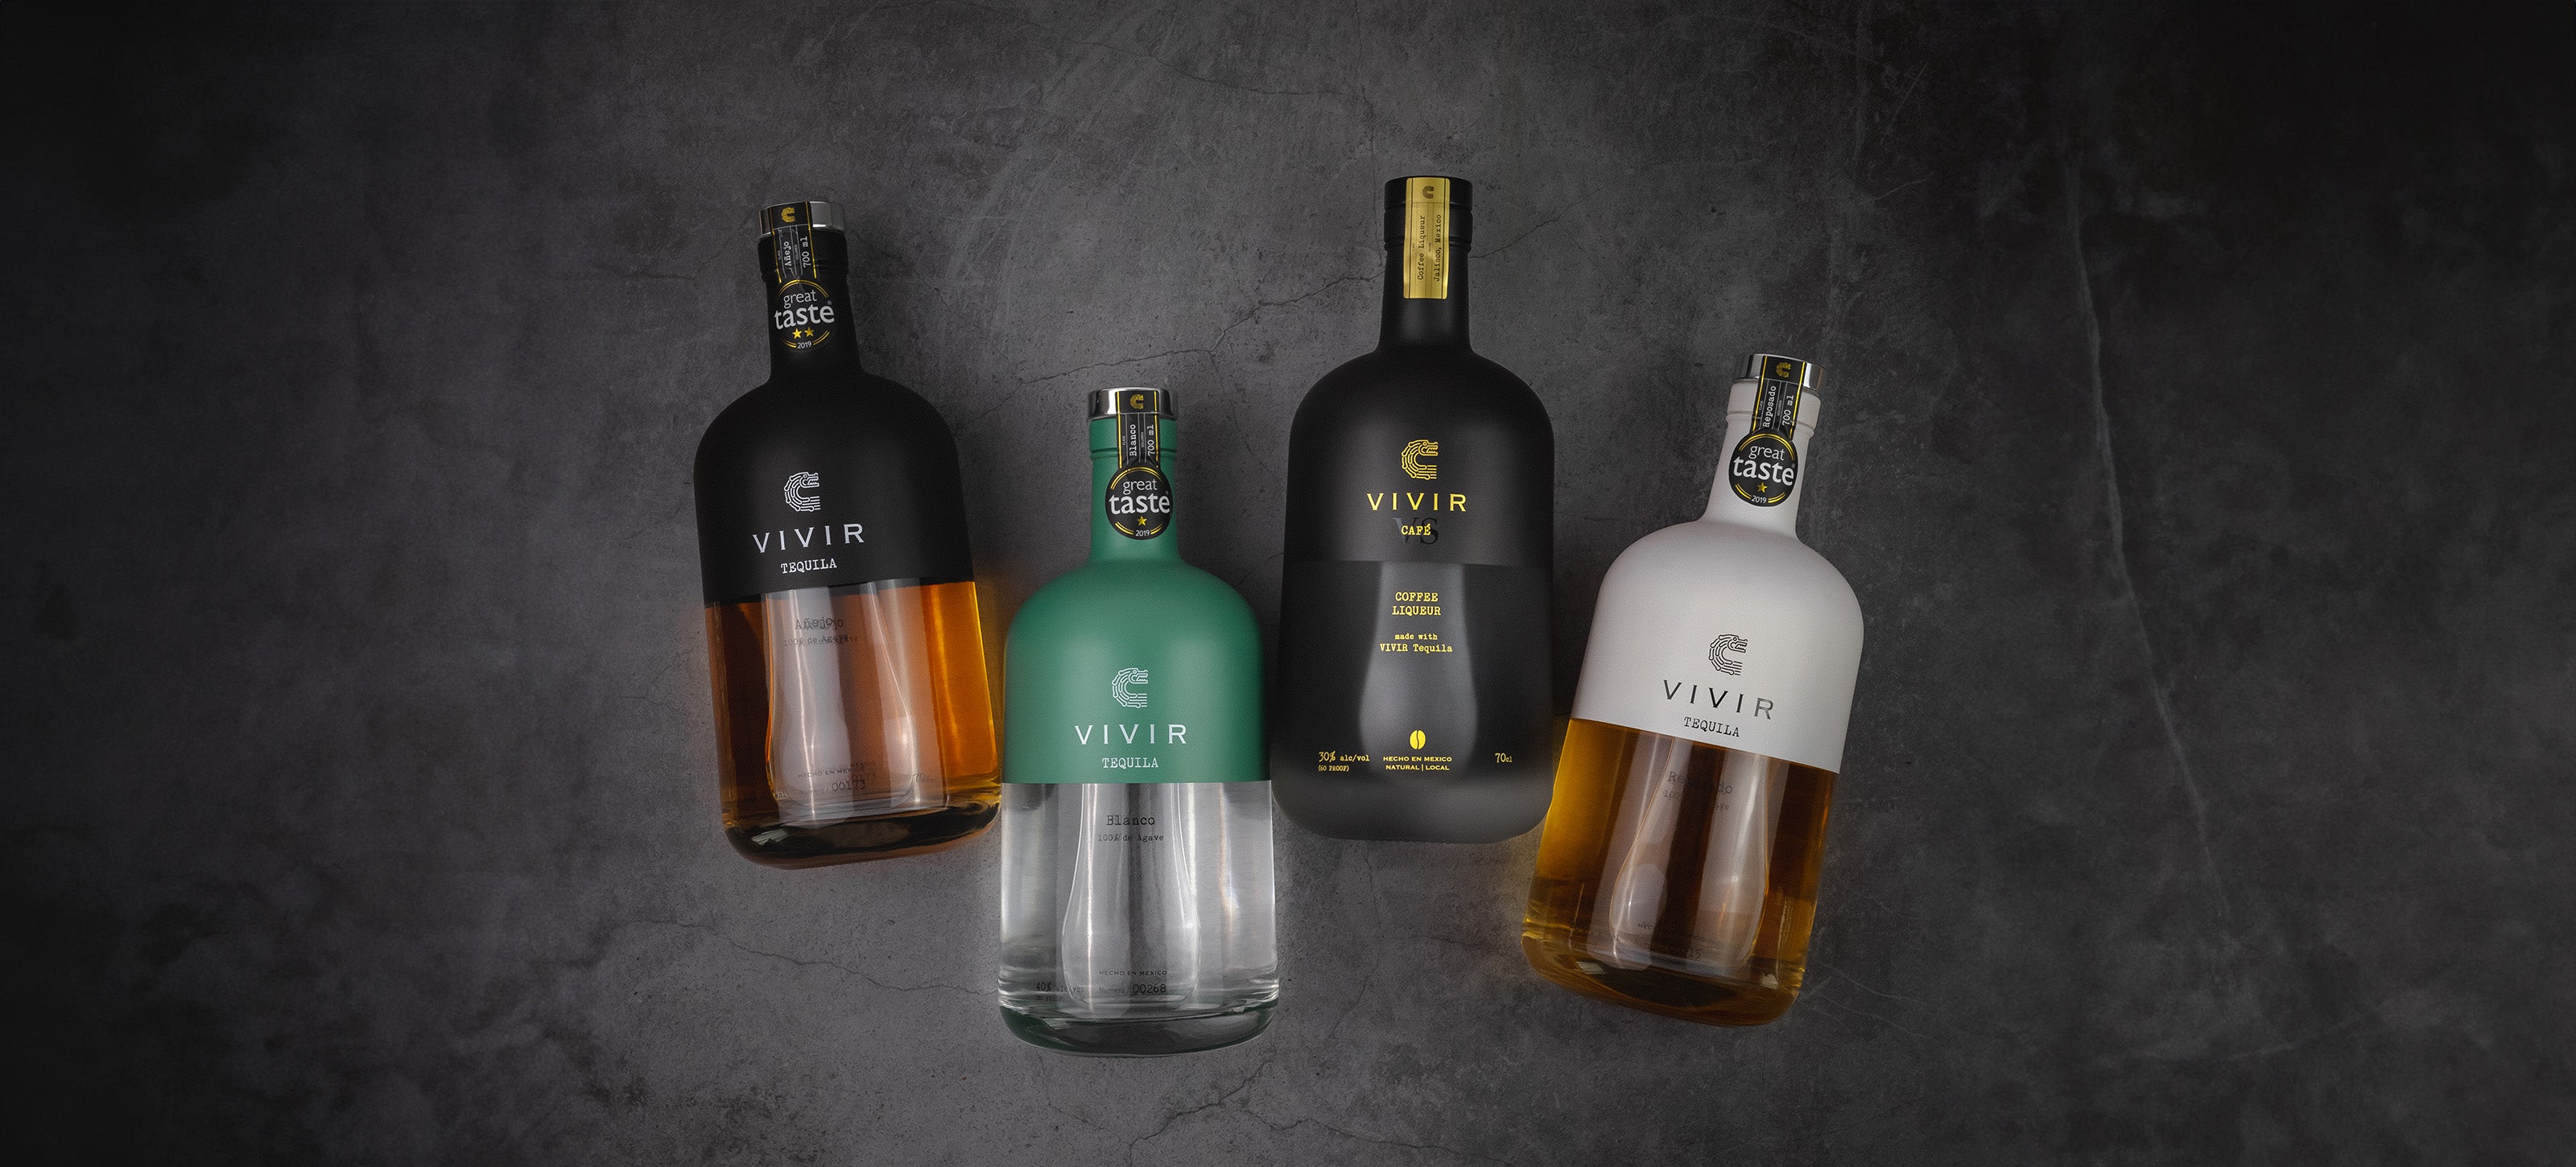 The four bottles of VIVIR Tequila are shown on a dark concrete background.